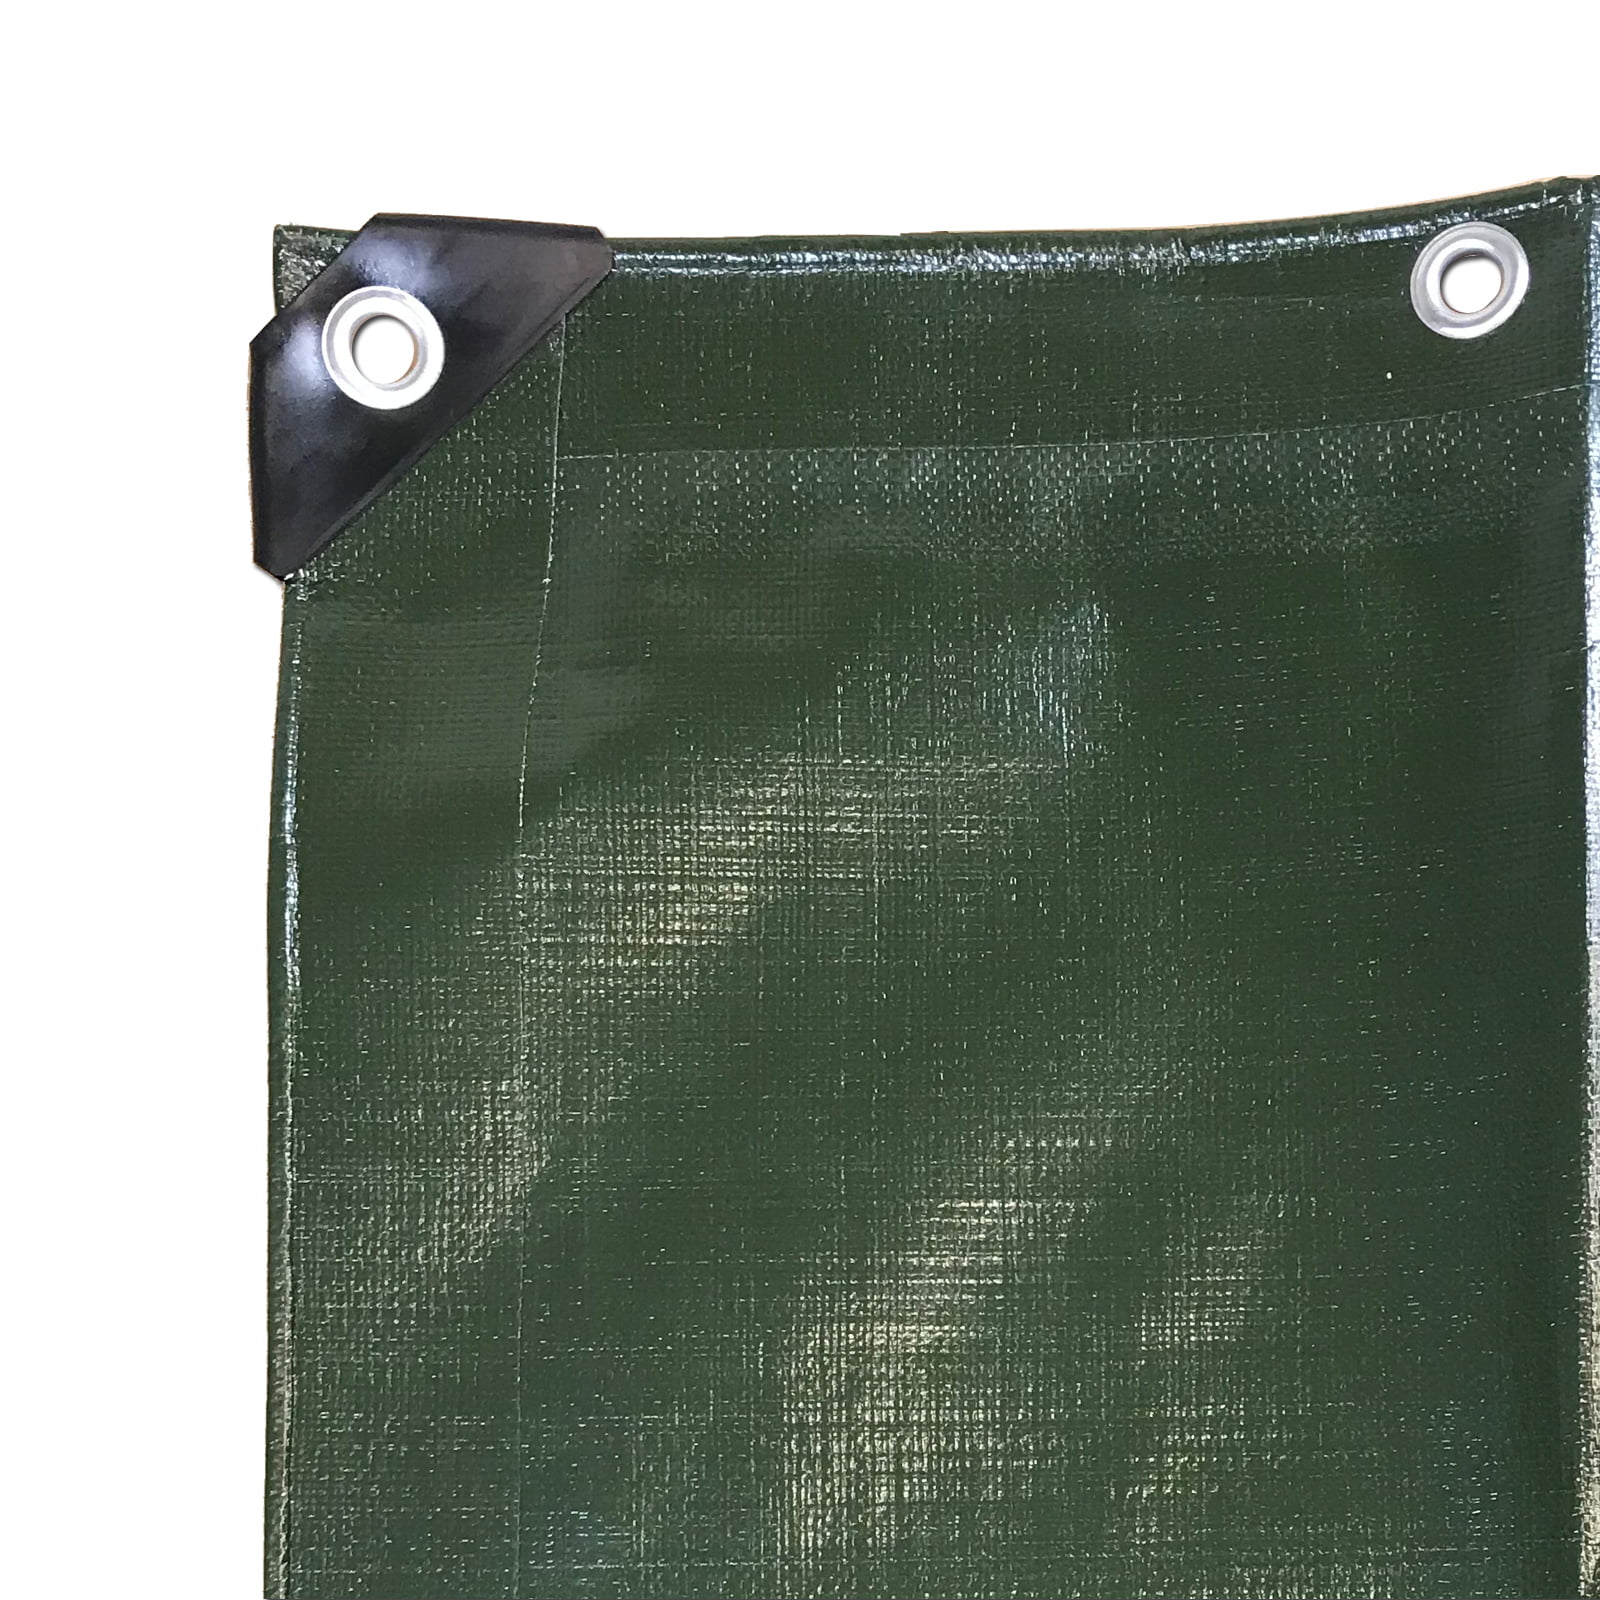 Tarpaulin 140g/m² Fabric Cover in White and Green Furniture Cover Tarpaulins WOW 